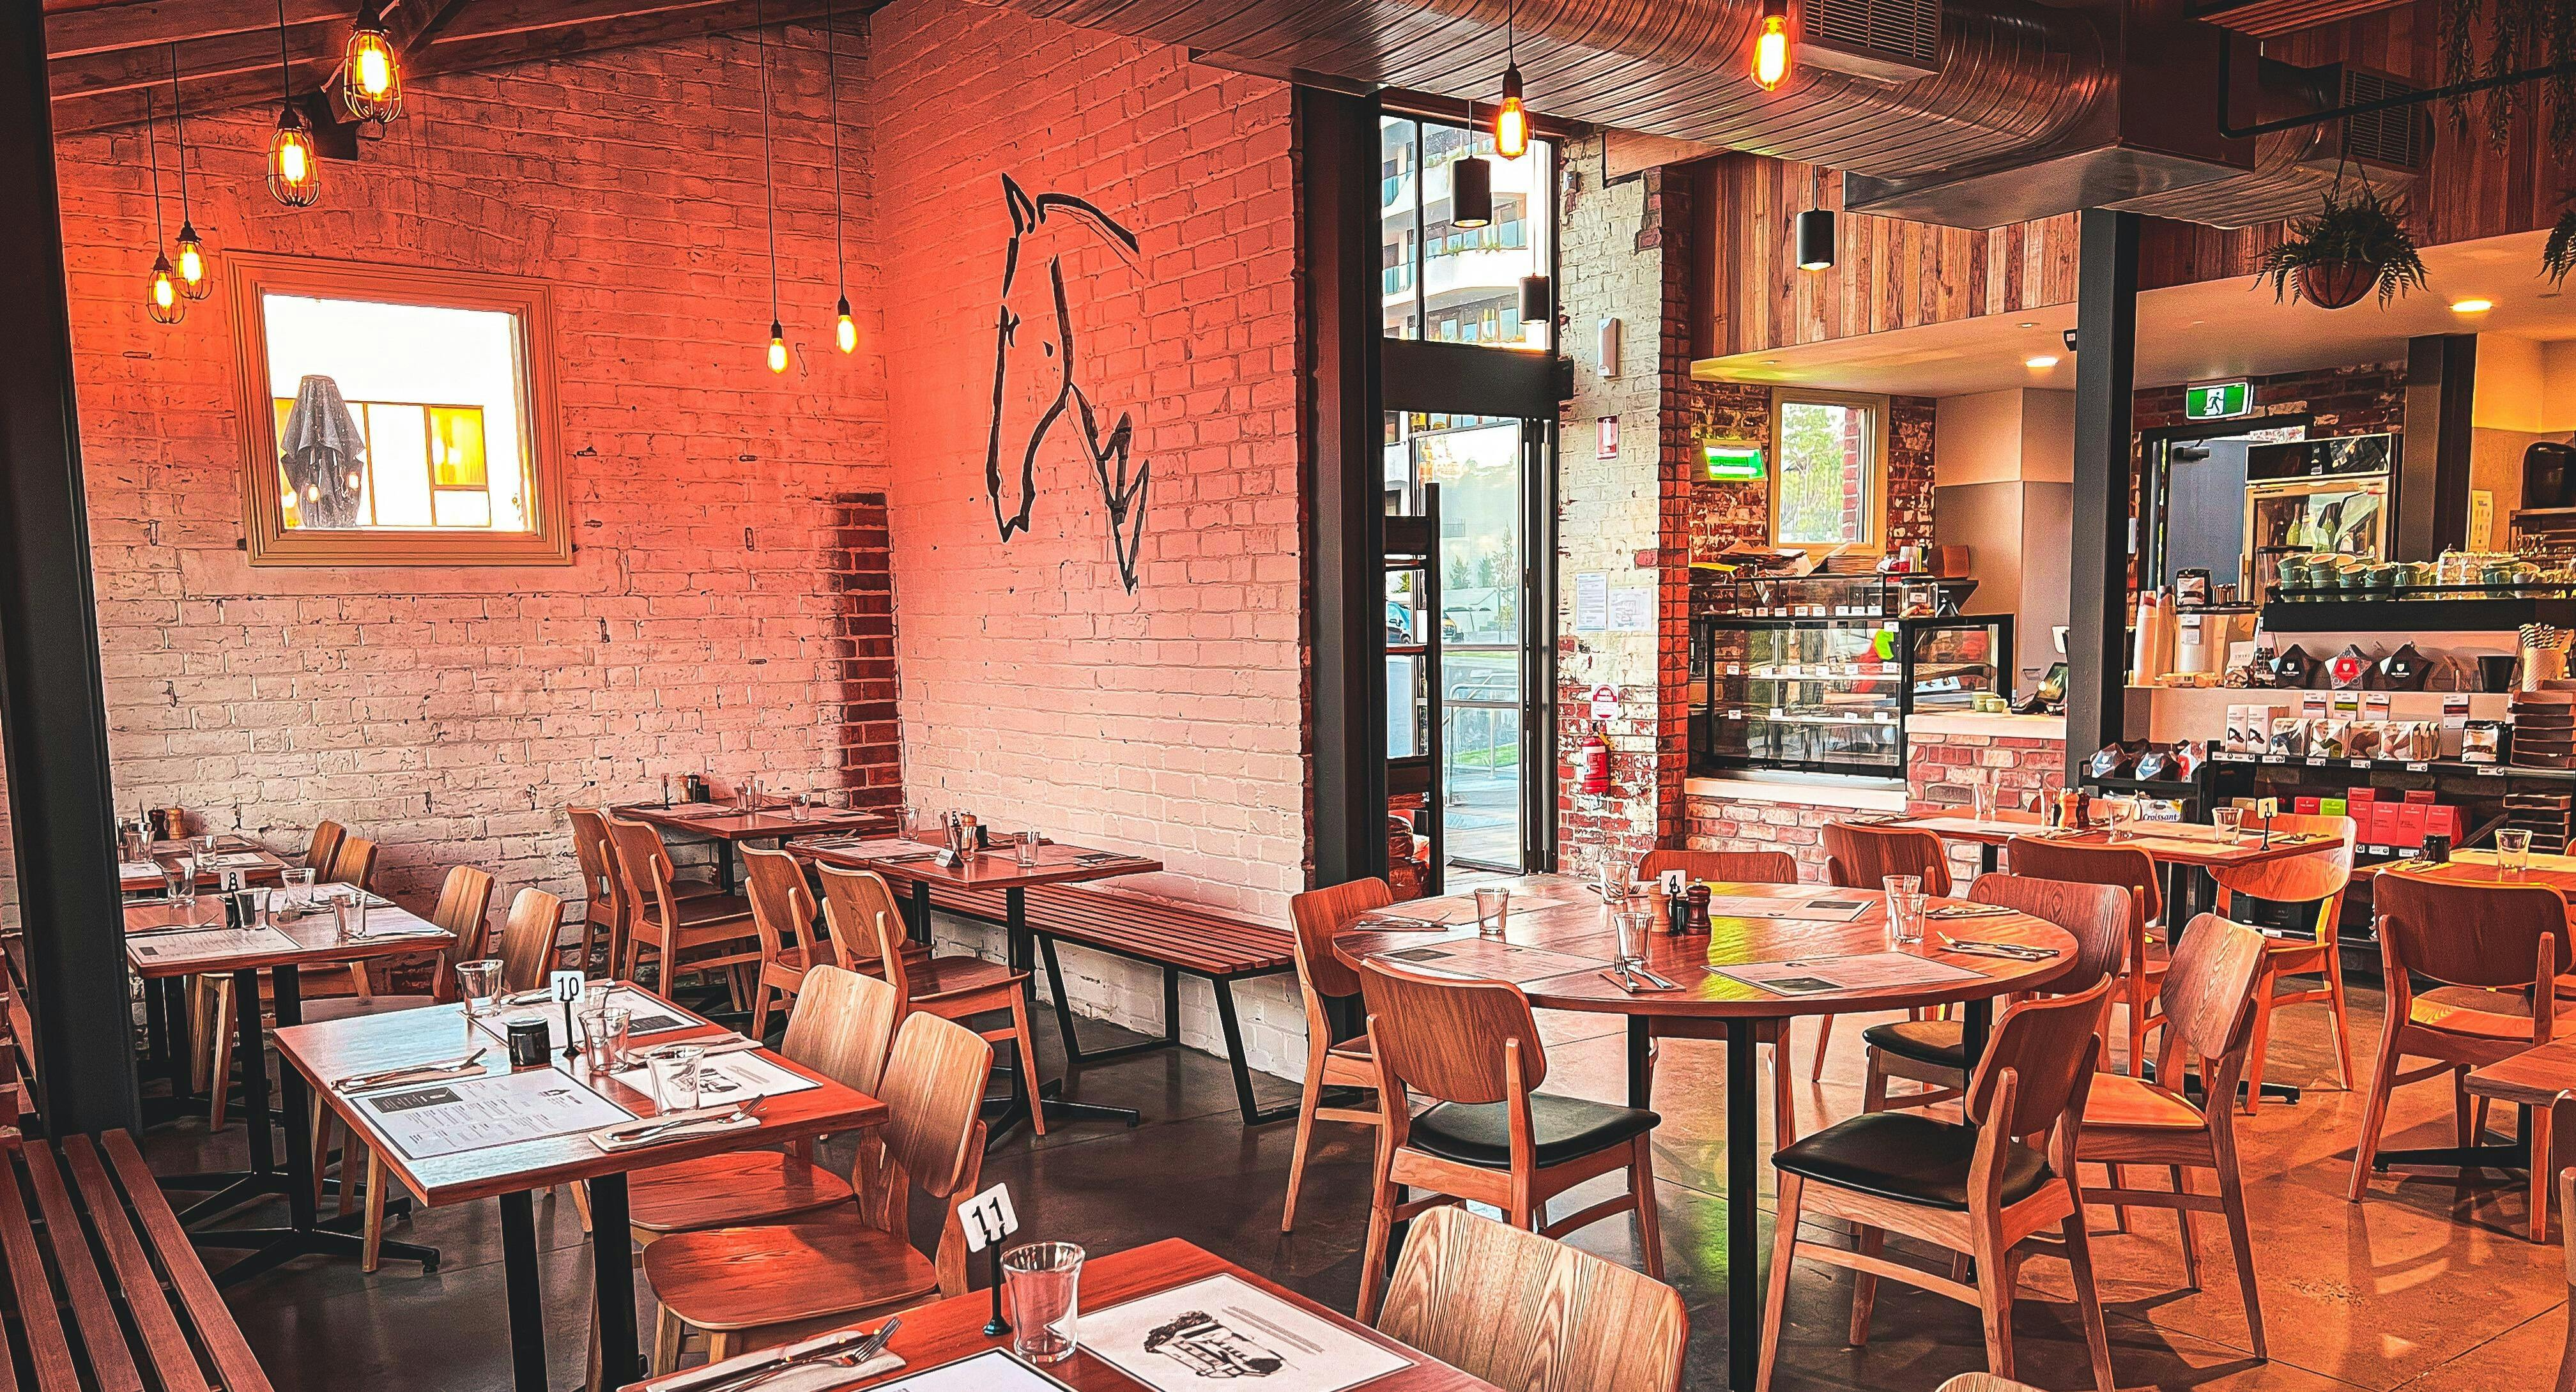 Photo of restaurant Stables Provedore Cafe in Doncaster, Melbourne